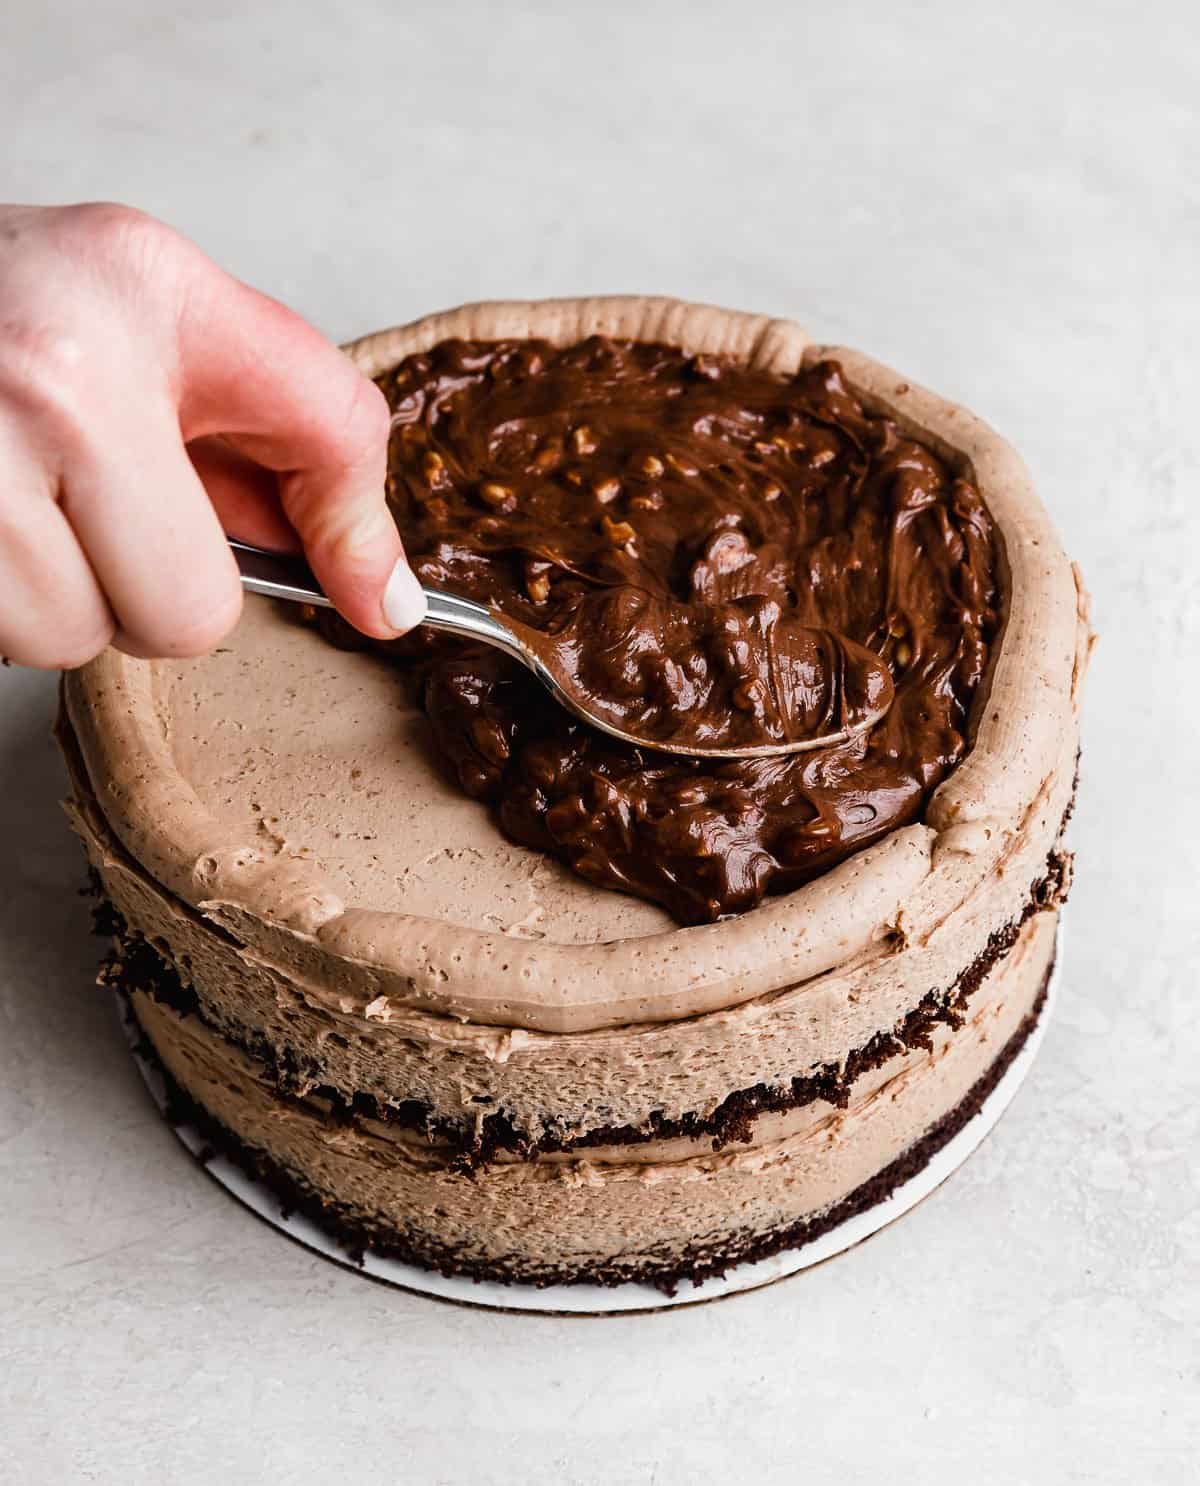 A hazelnut Nutella filling being spread over a chocolate frosting topped cake.